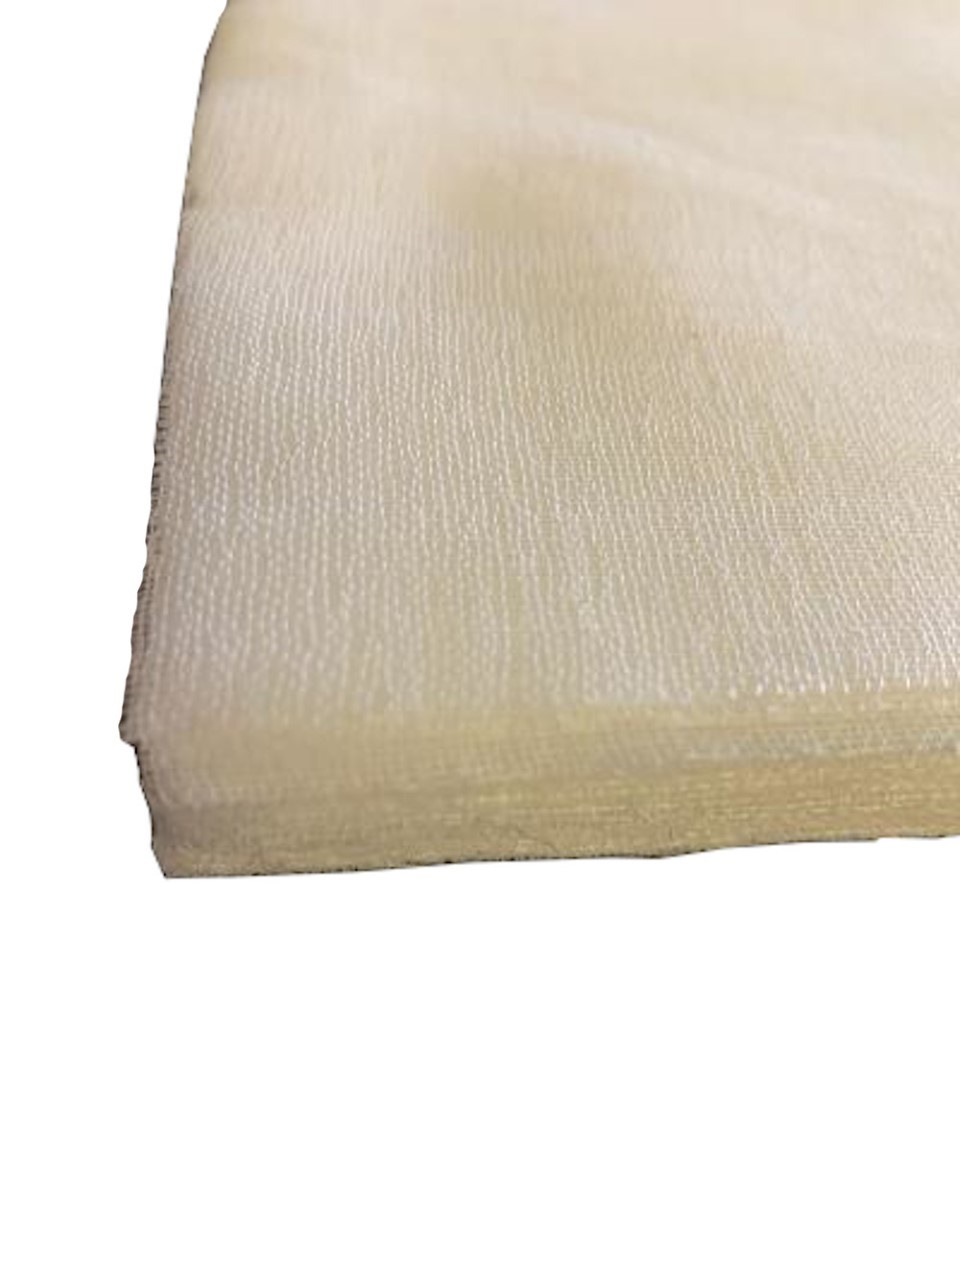 90 Grade Cheesecloth 6" x 6" Squares Bleached - 100 Pack